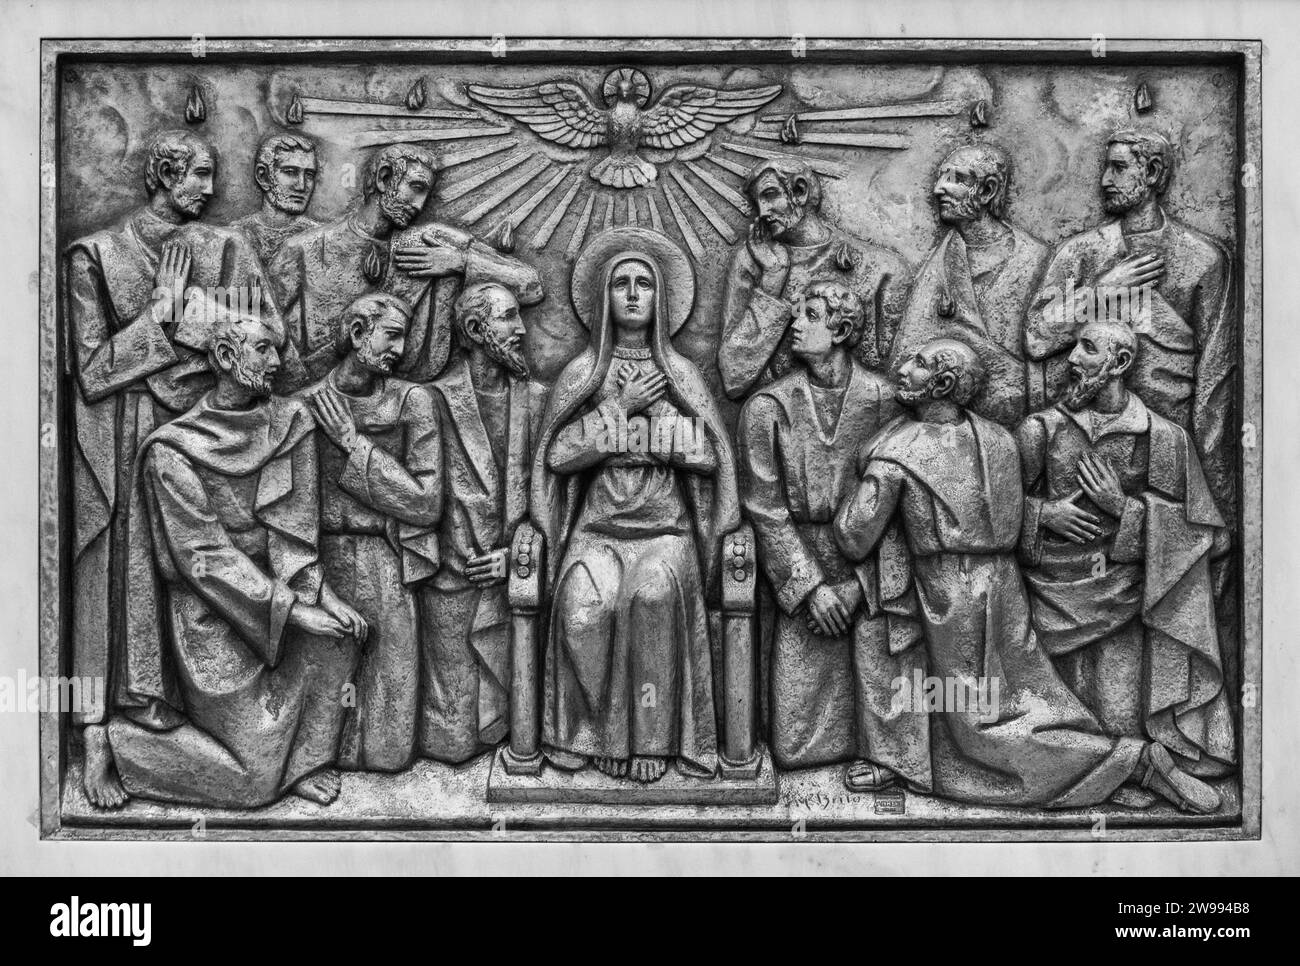 The Descent of the Holy Spirit – Third Glorious Mystery. A relief sculpture in the Basilica of Our Lady of the Rosary of Fatima in Fatima, Portugal. Stock Photo